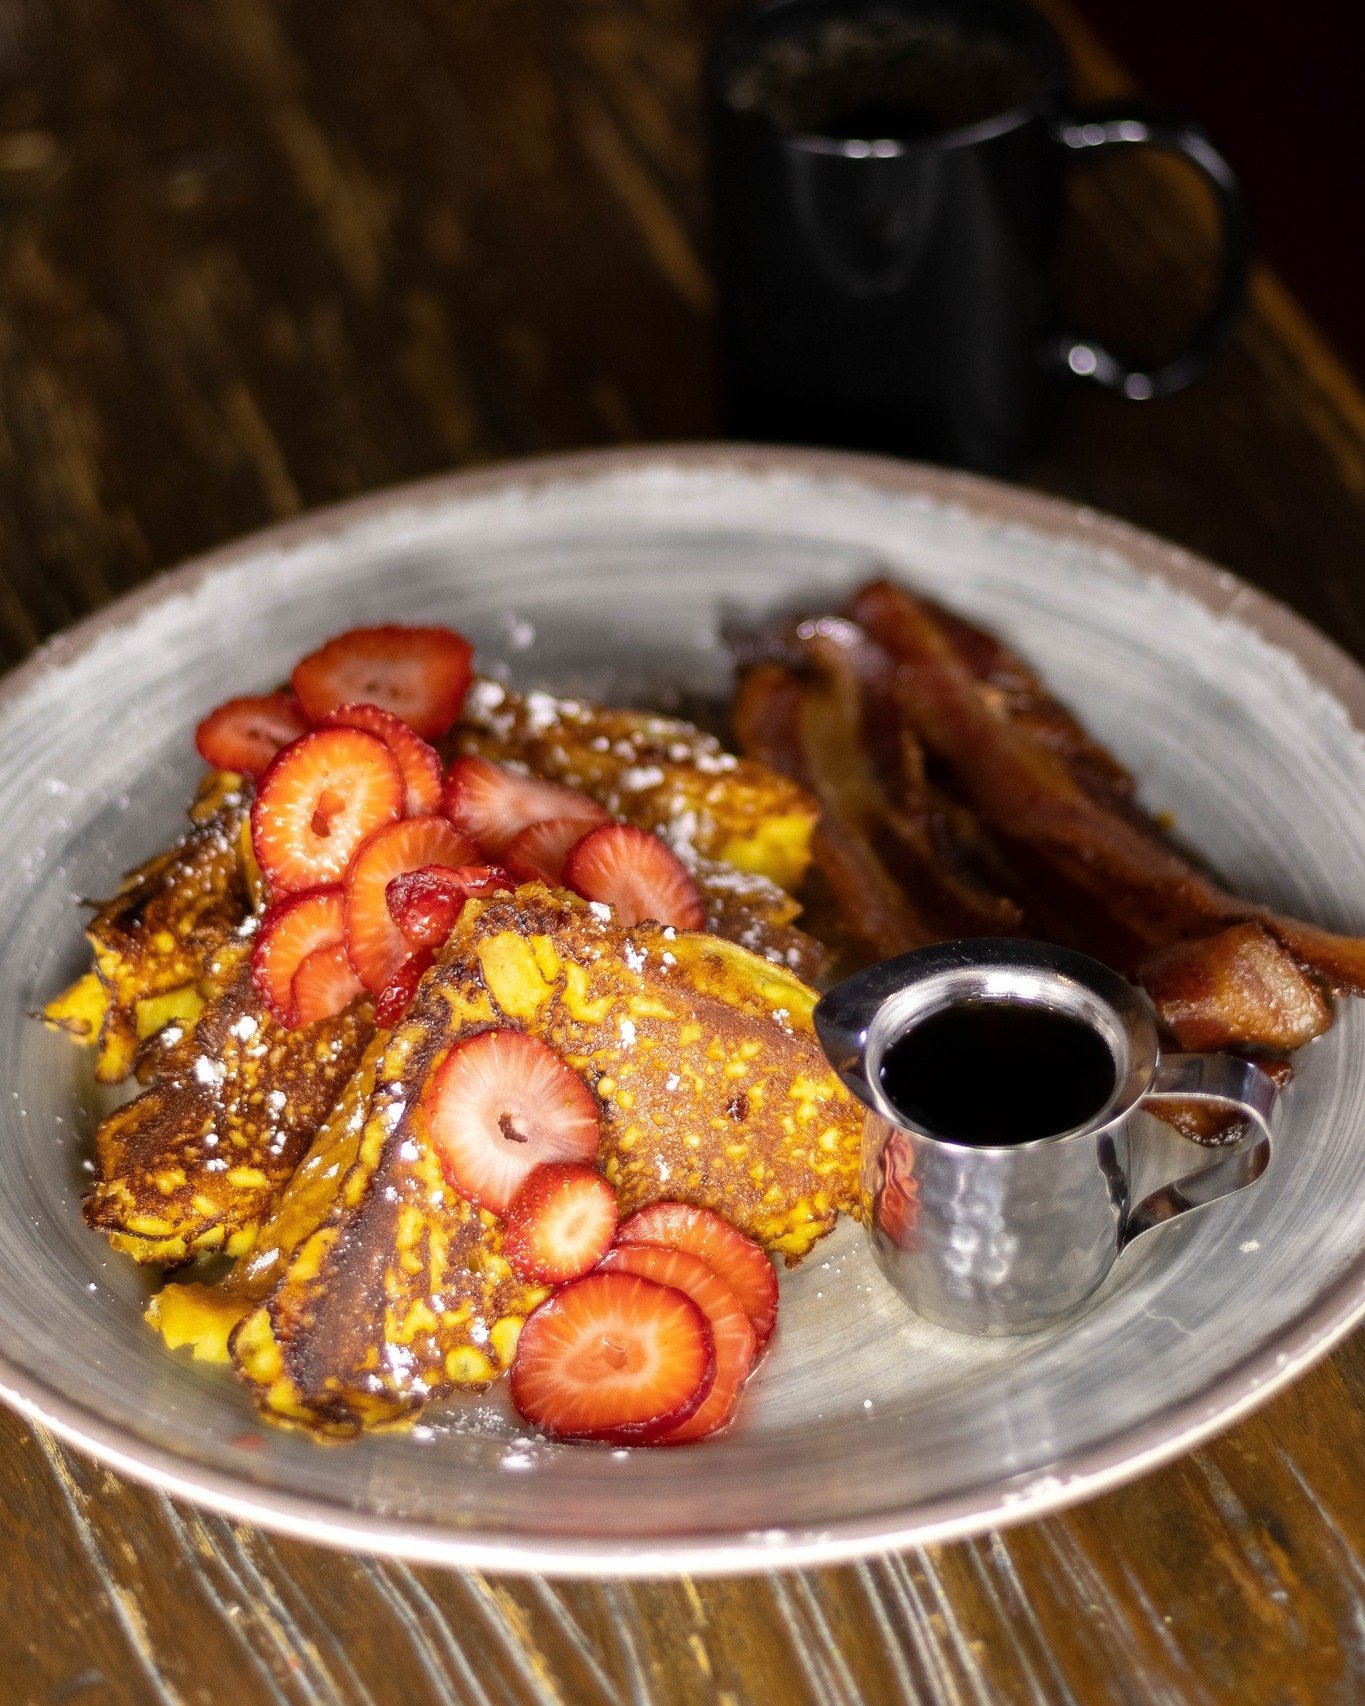 New Brunch Item! 🍓🍞🥓 Cream Cheese-stuffed Strawberry French Toast 😋 

Served on Saturdays &amp; Sundays 9 AM-12 PM, along with many other tasty breakfast delights. 🍳